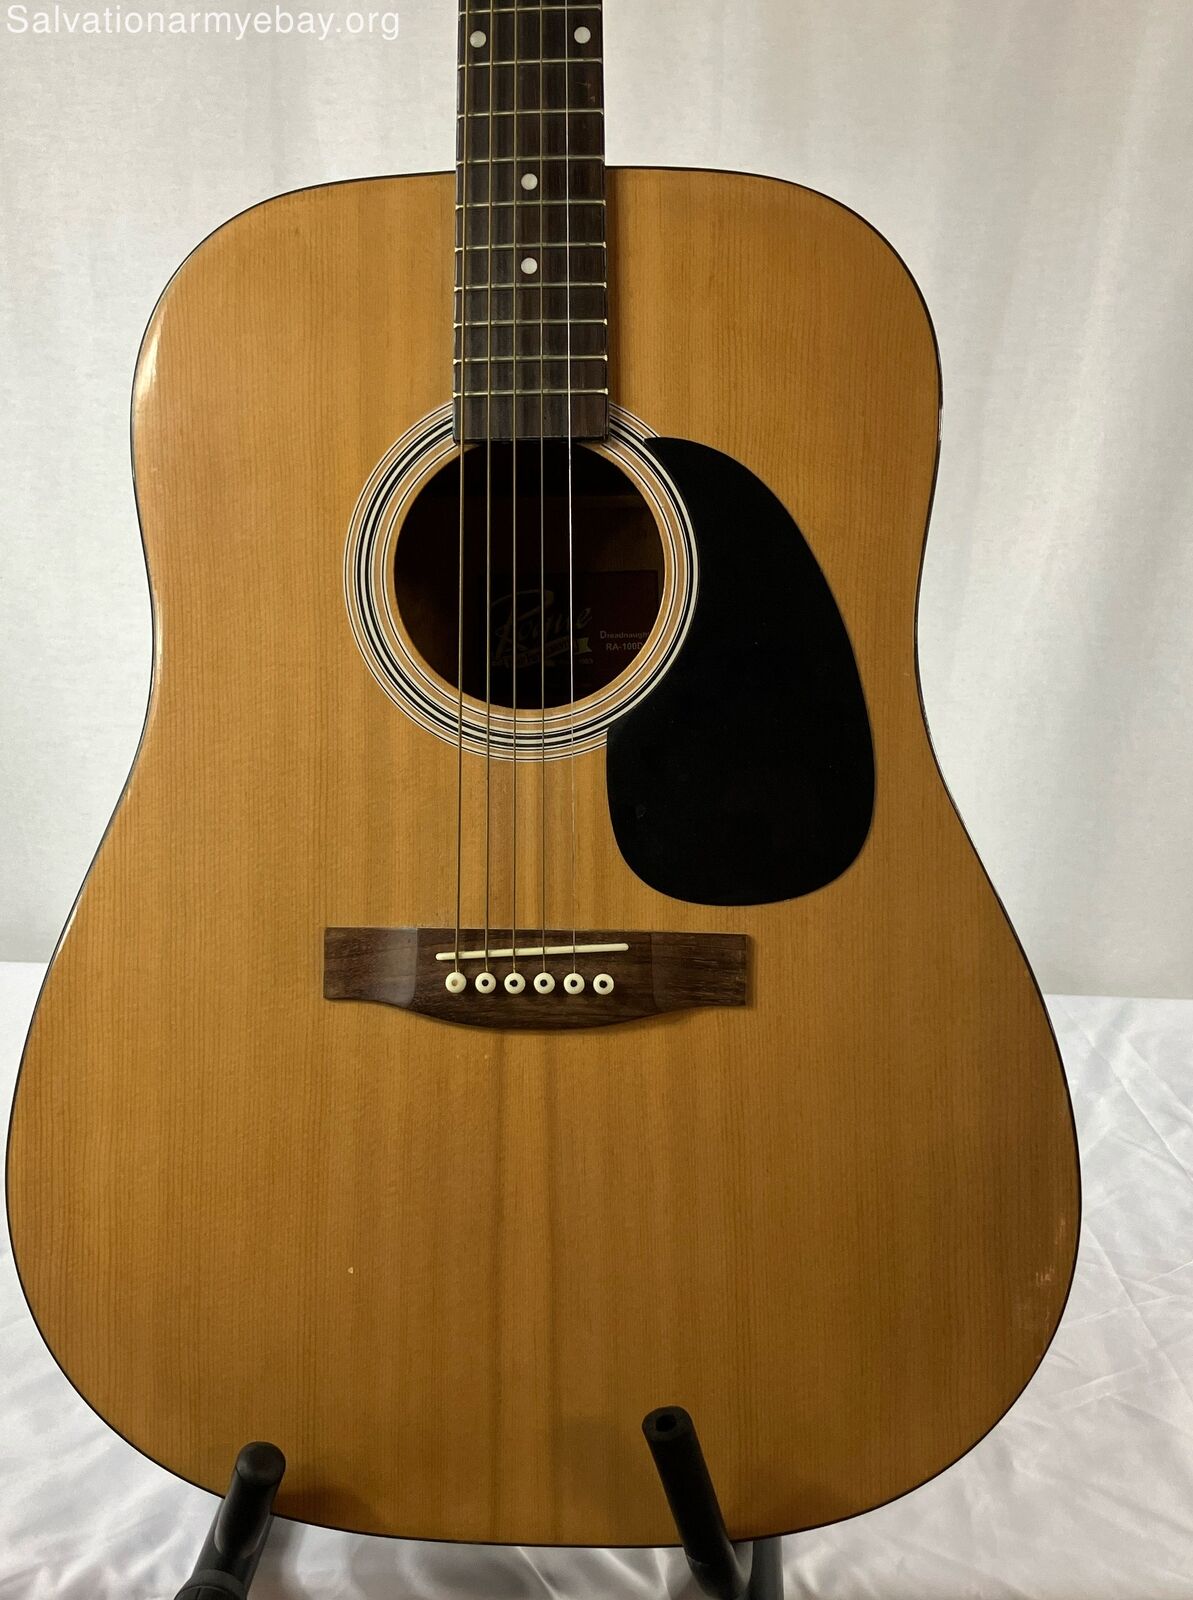 Rogue RA100D Acoustic Guitar [Needs New Strings] [Has Slight Chips on Body] 2